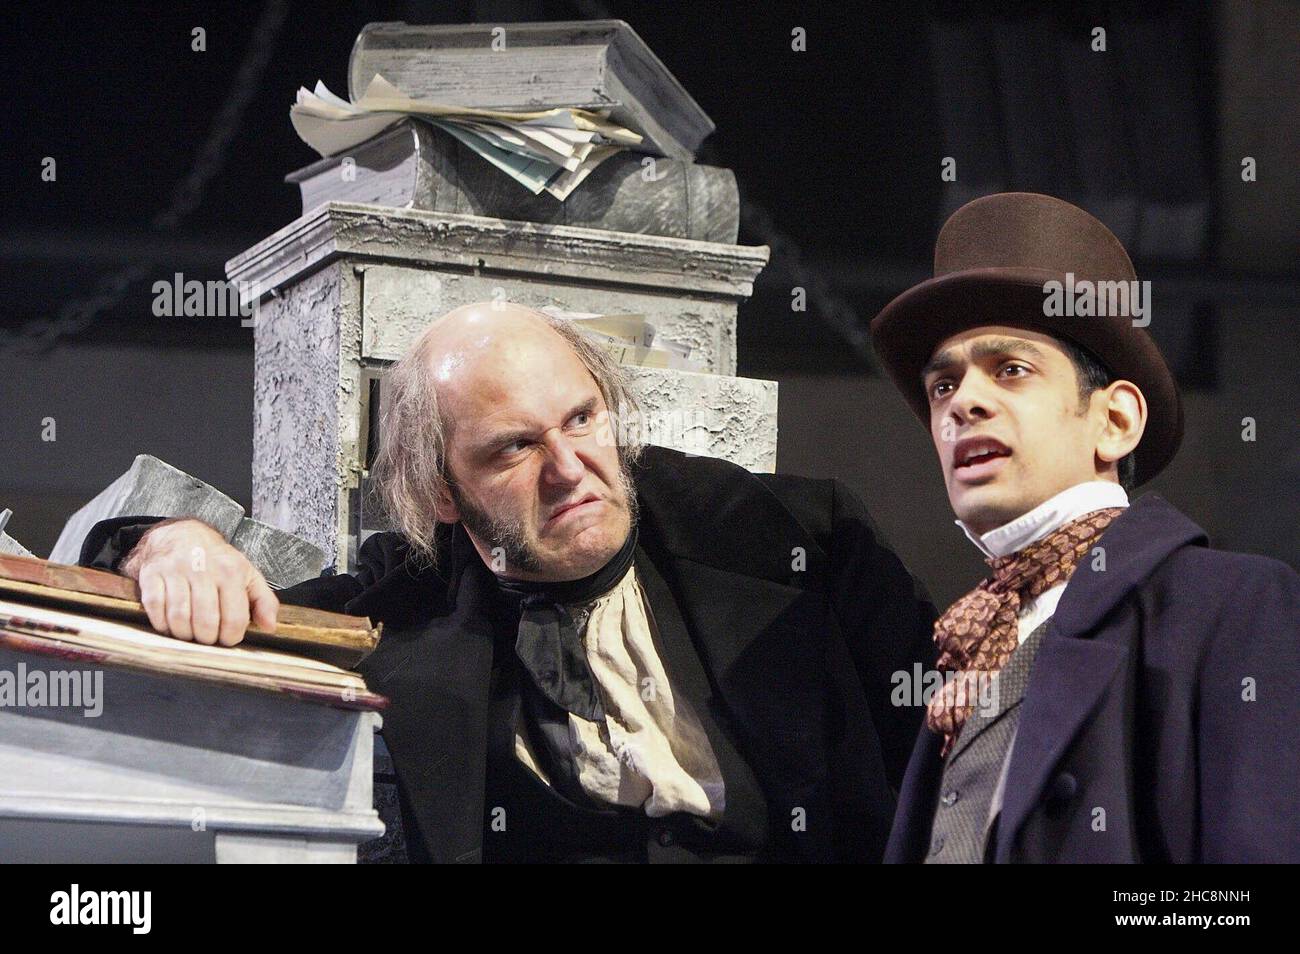 l-r: John Ramm (Ebenezer Scrooge), Amit Shah (Young Scrooge) in A CHRISTMAS CAROL by Charles Dickens at the Rose of Kingston, Surrey, England  04/12/2008  adapted for the stage by Karen Louise Hebden  set design: Simon Higlett  costumes: Mark Bouman  director: Stephen Unwin Stock Photo